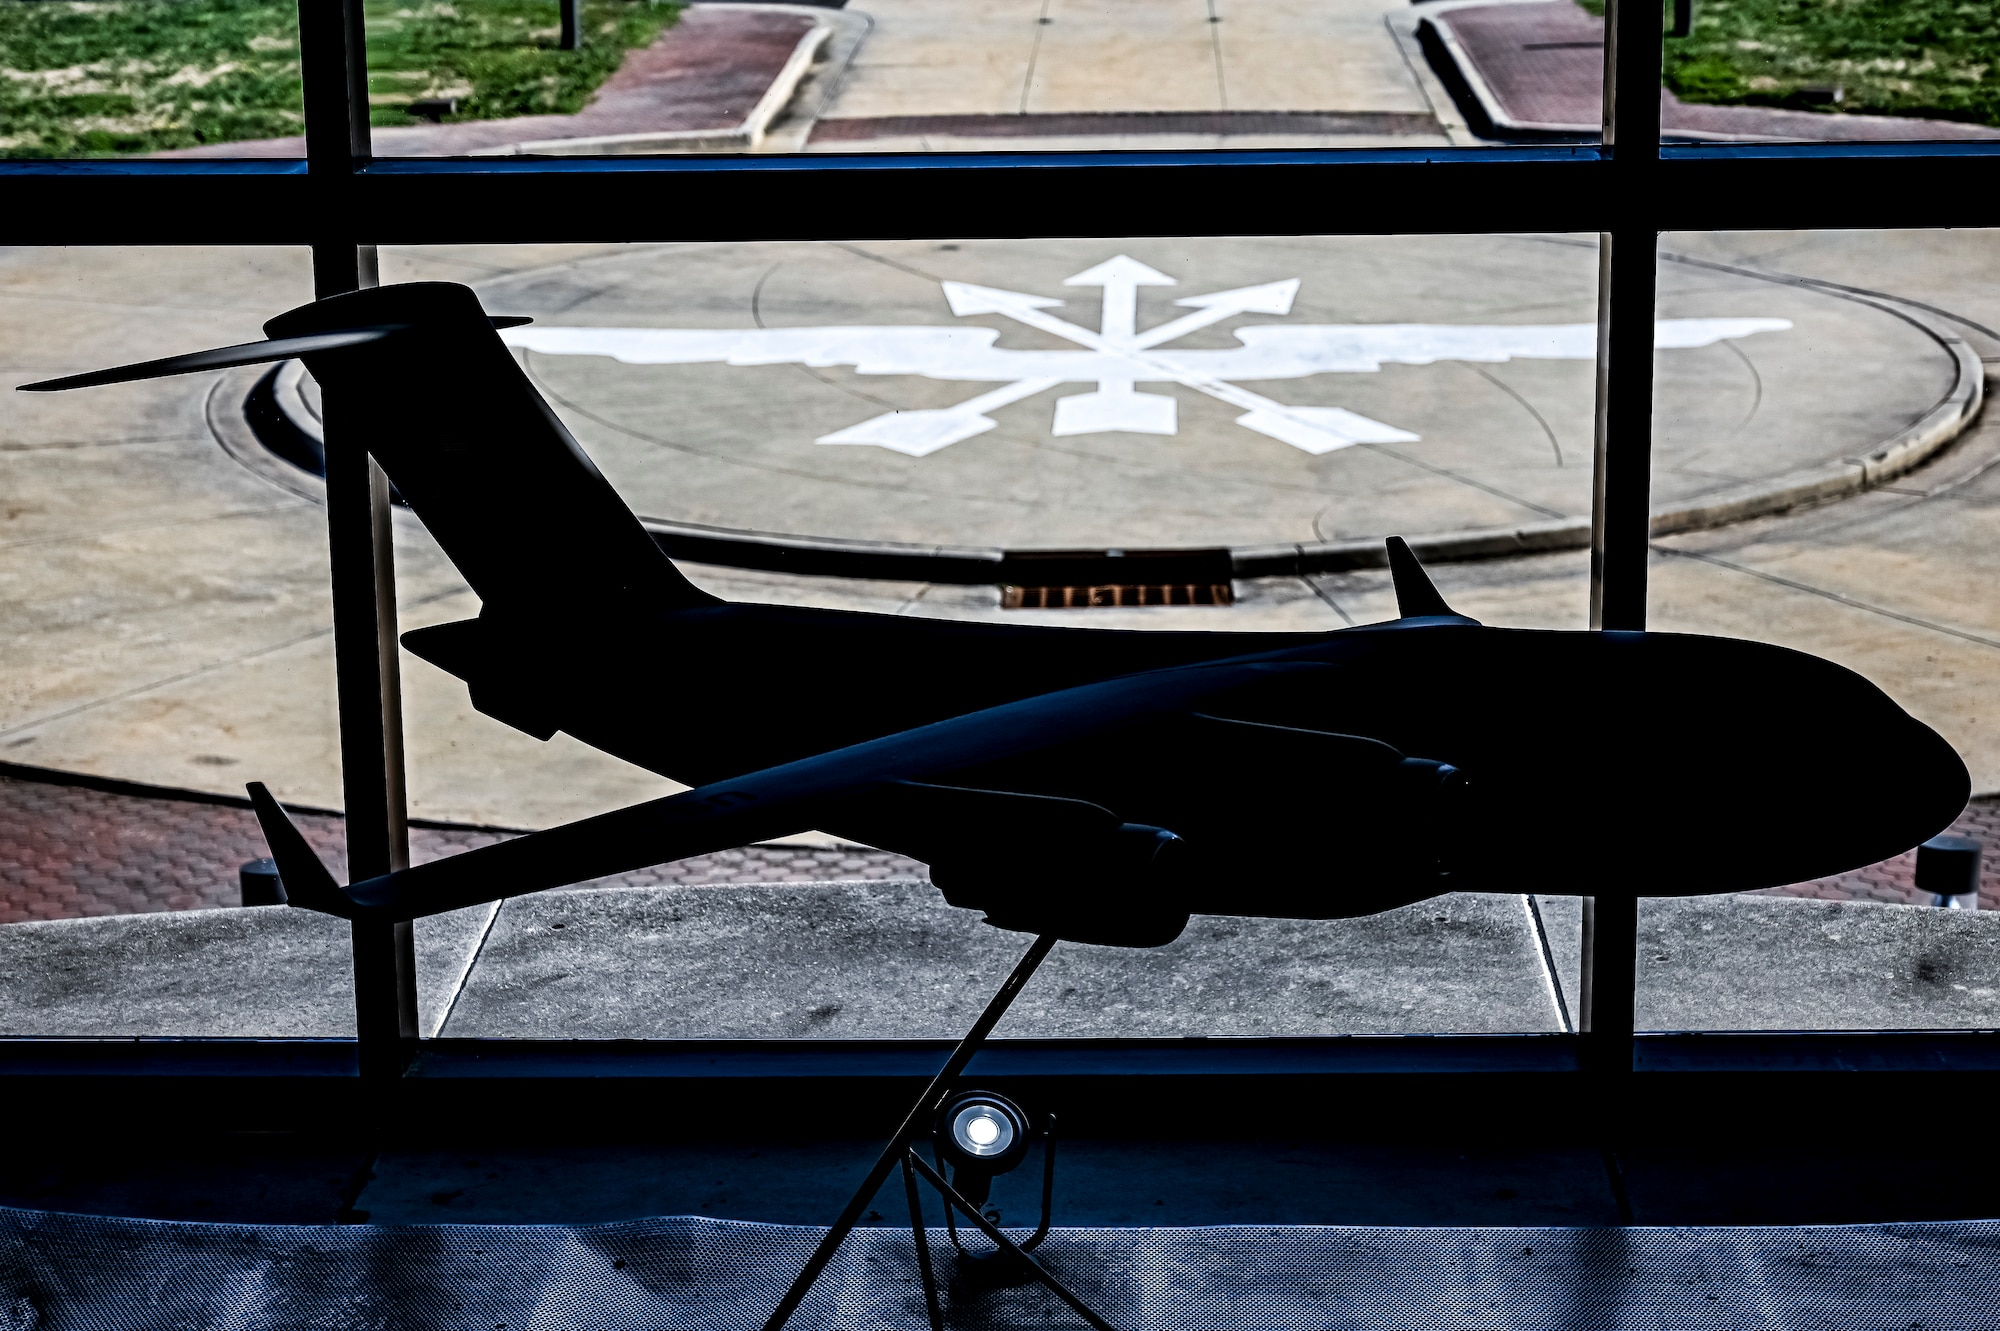 A C-17 Globemaster III model is displayed at the 305th Air Mobility Wing Consolidated Maintenance Operations Facility building prior to the arrival of U.S. Air Force Maj. Gen. Albert Miller, Aircrew Task Force director, at Joint Base McGuire-Dix-Lakehurst, N.J. on Aug. 25, 2022. Miller has amplified community outreach to aircrew members in the field through increased site visits. These visits provide a chance to have meaningful discussions with all aircrew members to capture operational, quality of life, and quality of service concerns to inform policy decisions.